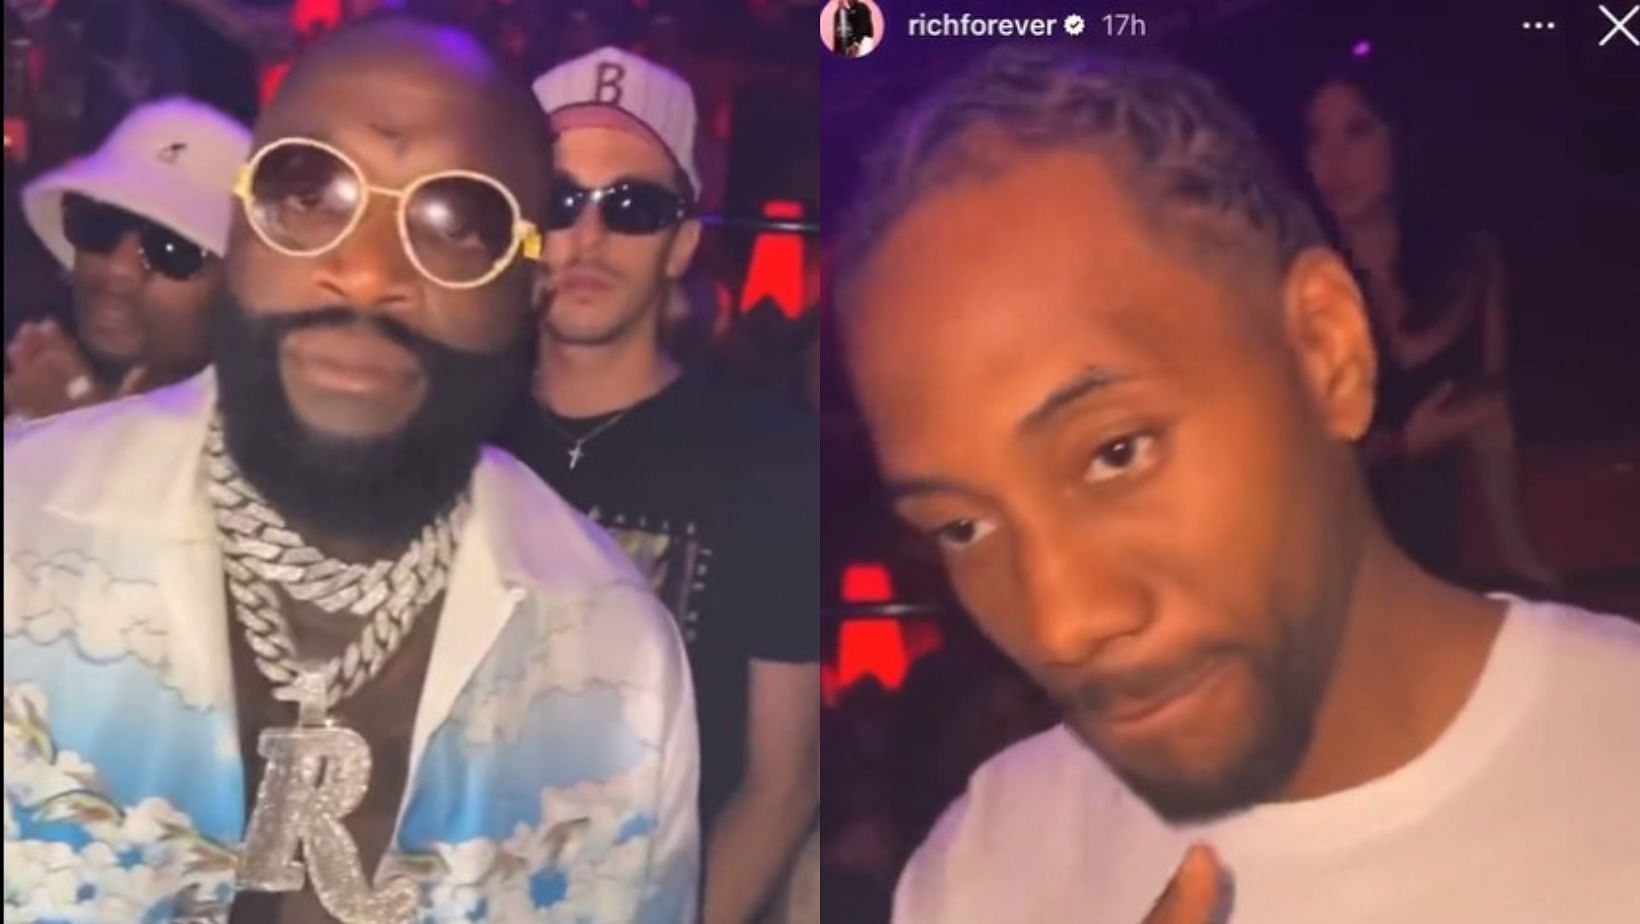 Kawhi Leonard recently partied with rapper Rick Ross.